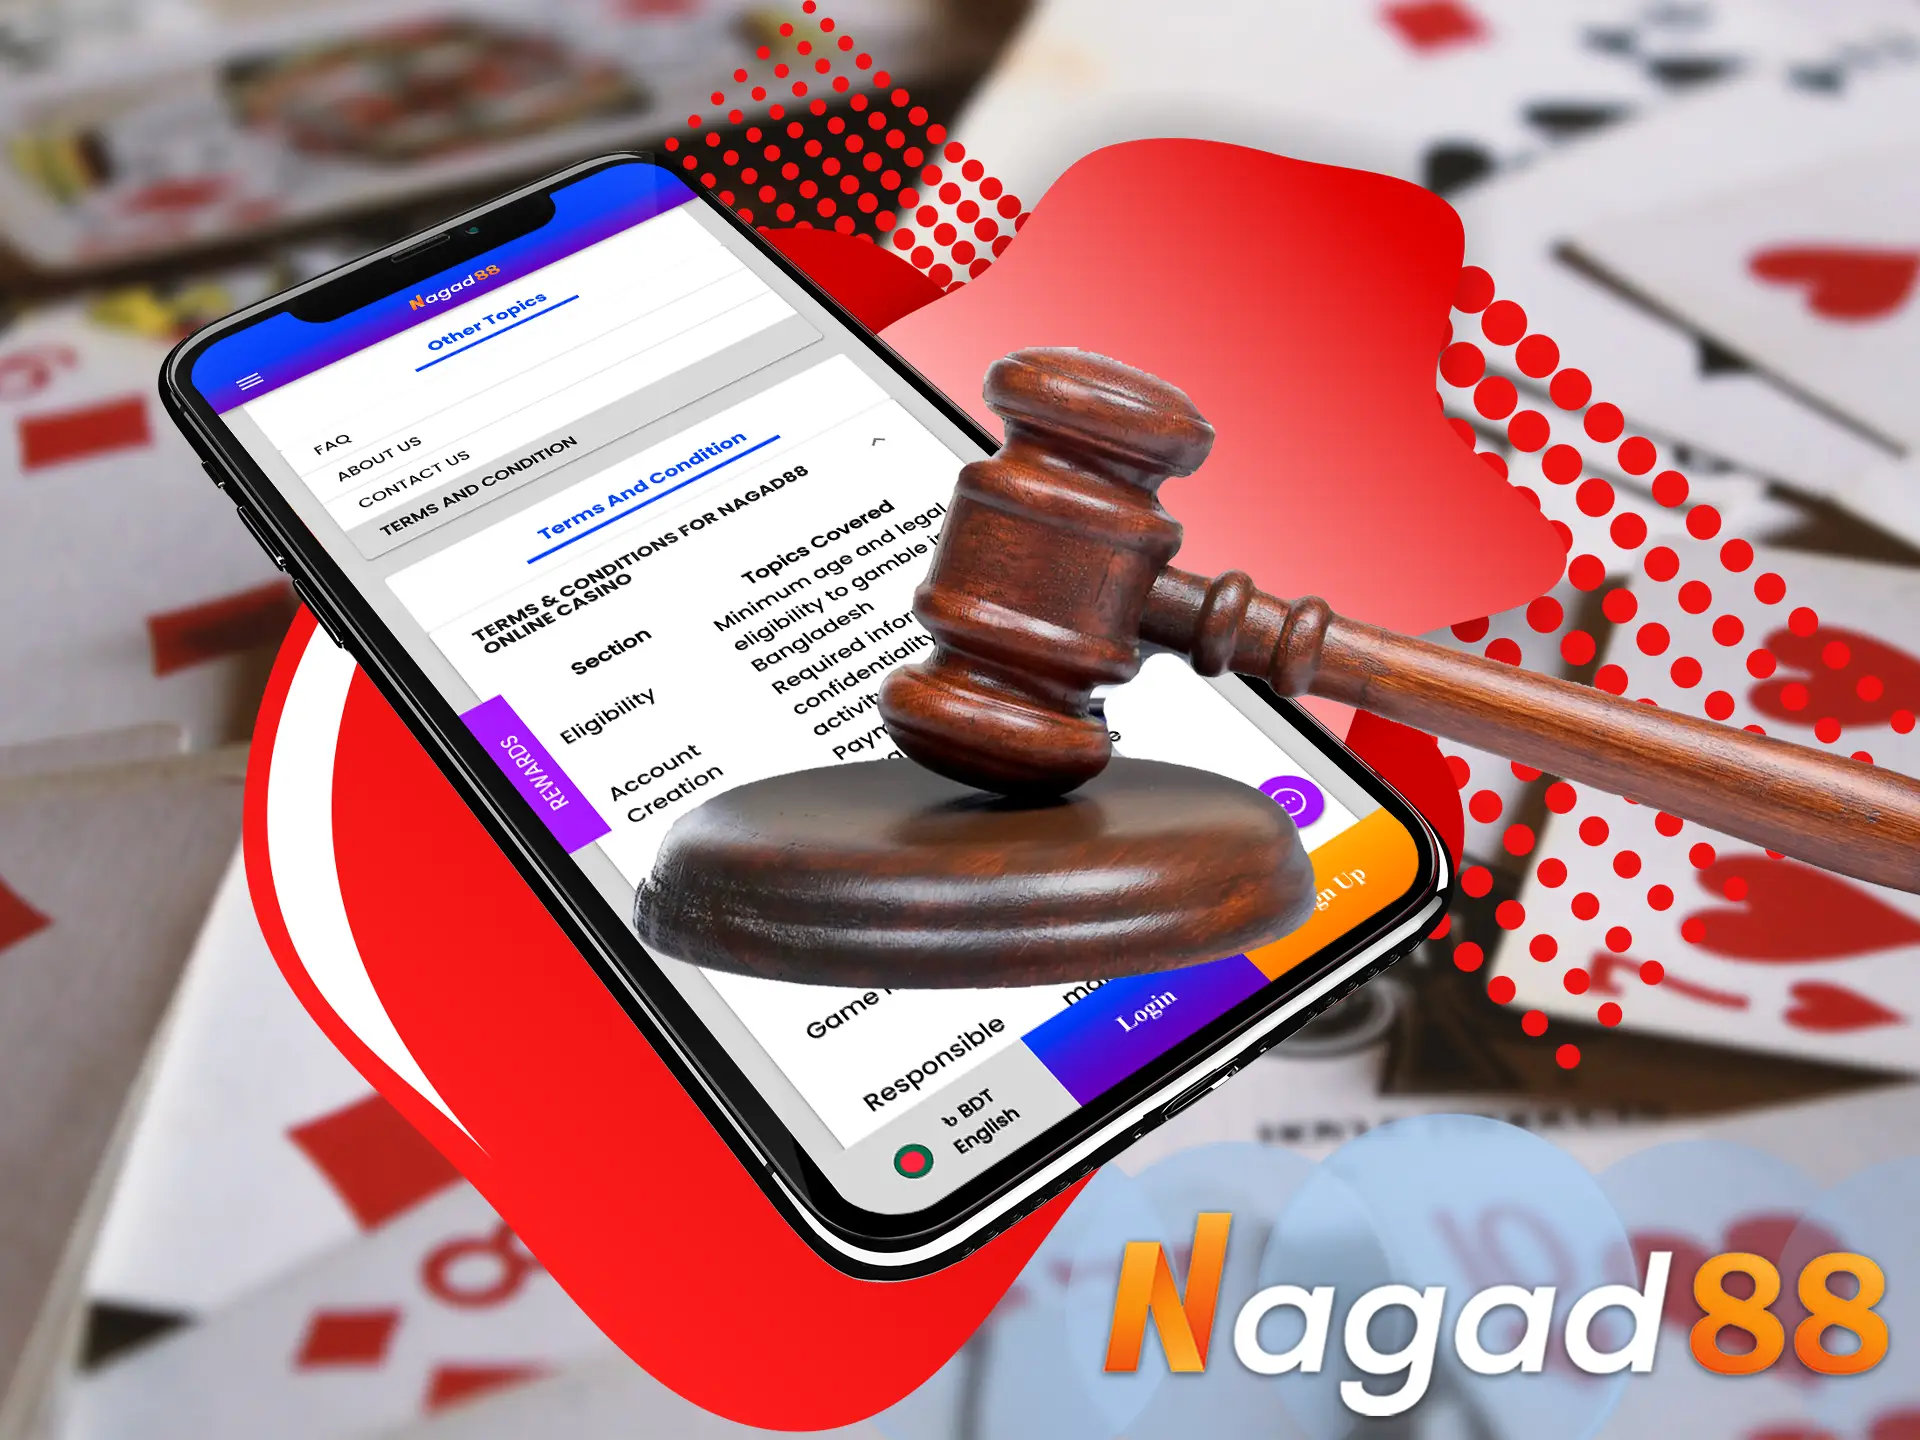 Nagad88 is a world renowned bookmaker operating legally, licensed by the Curacao E-Gaming Commission.